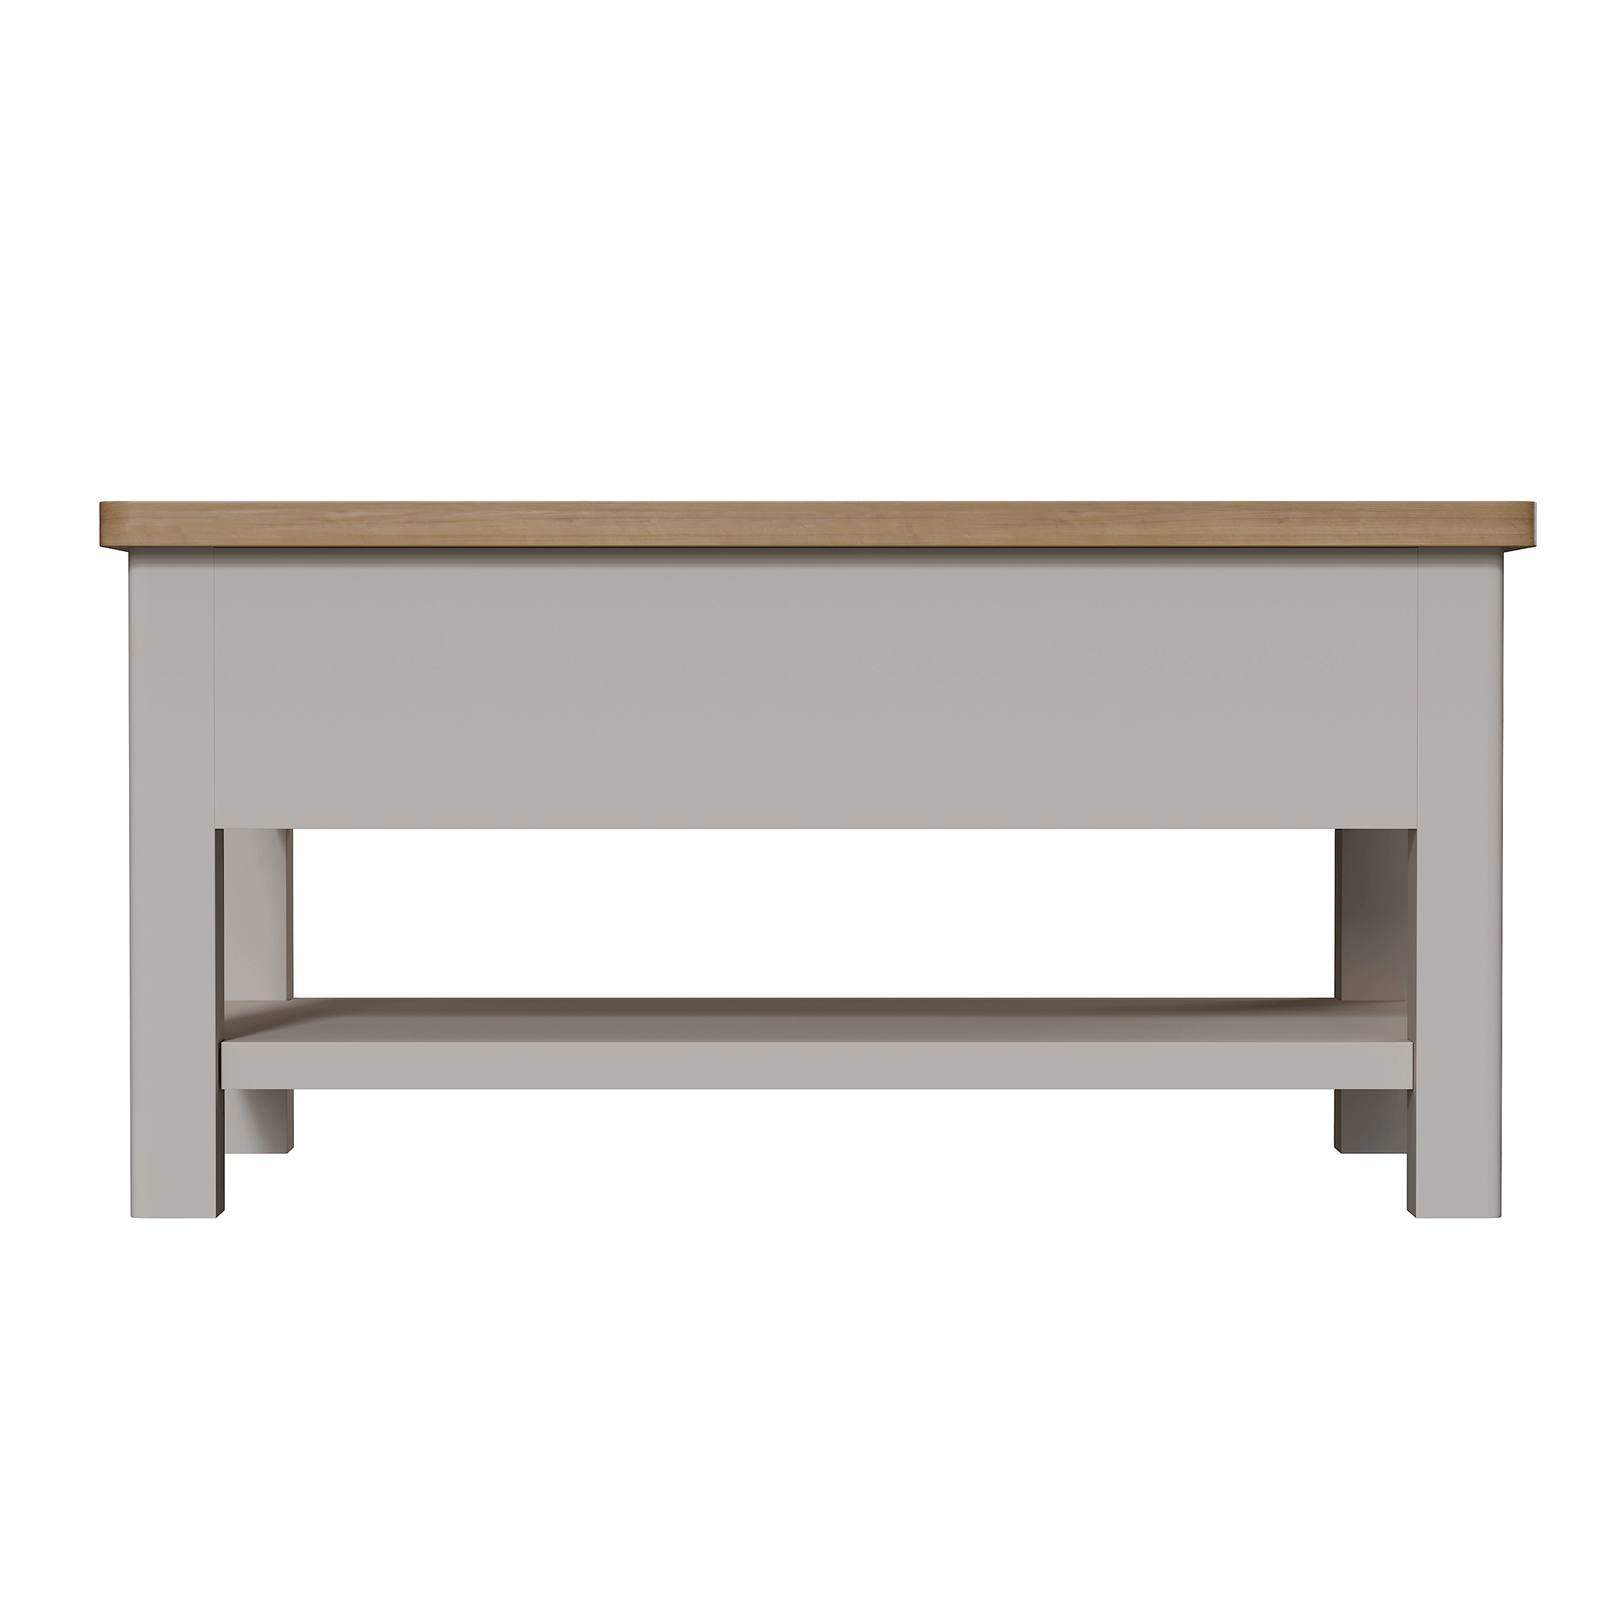 Padstow Large Coffee Table - Truffle